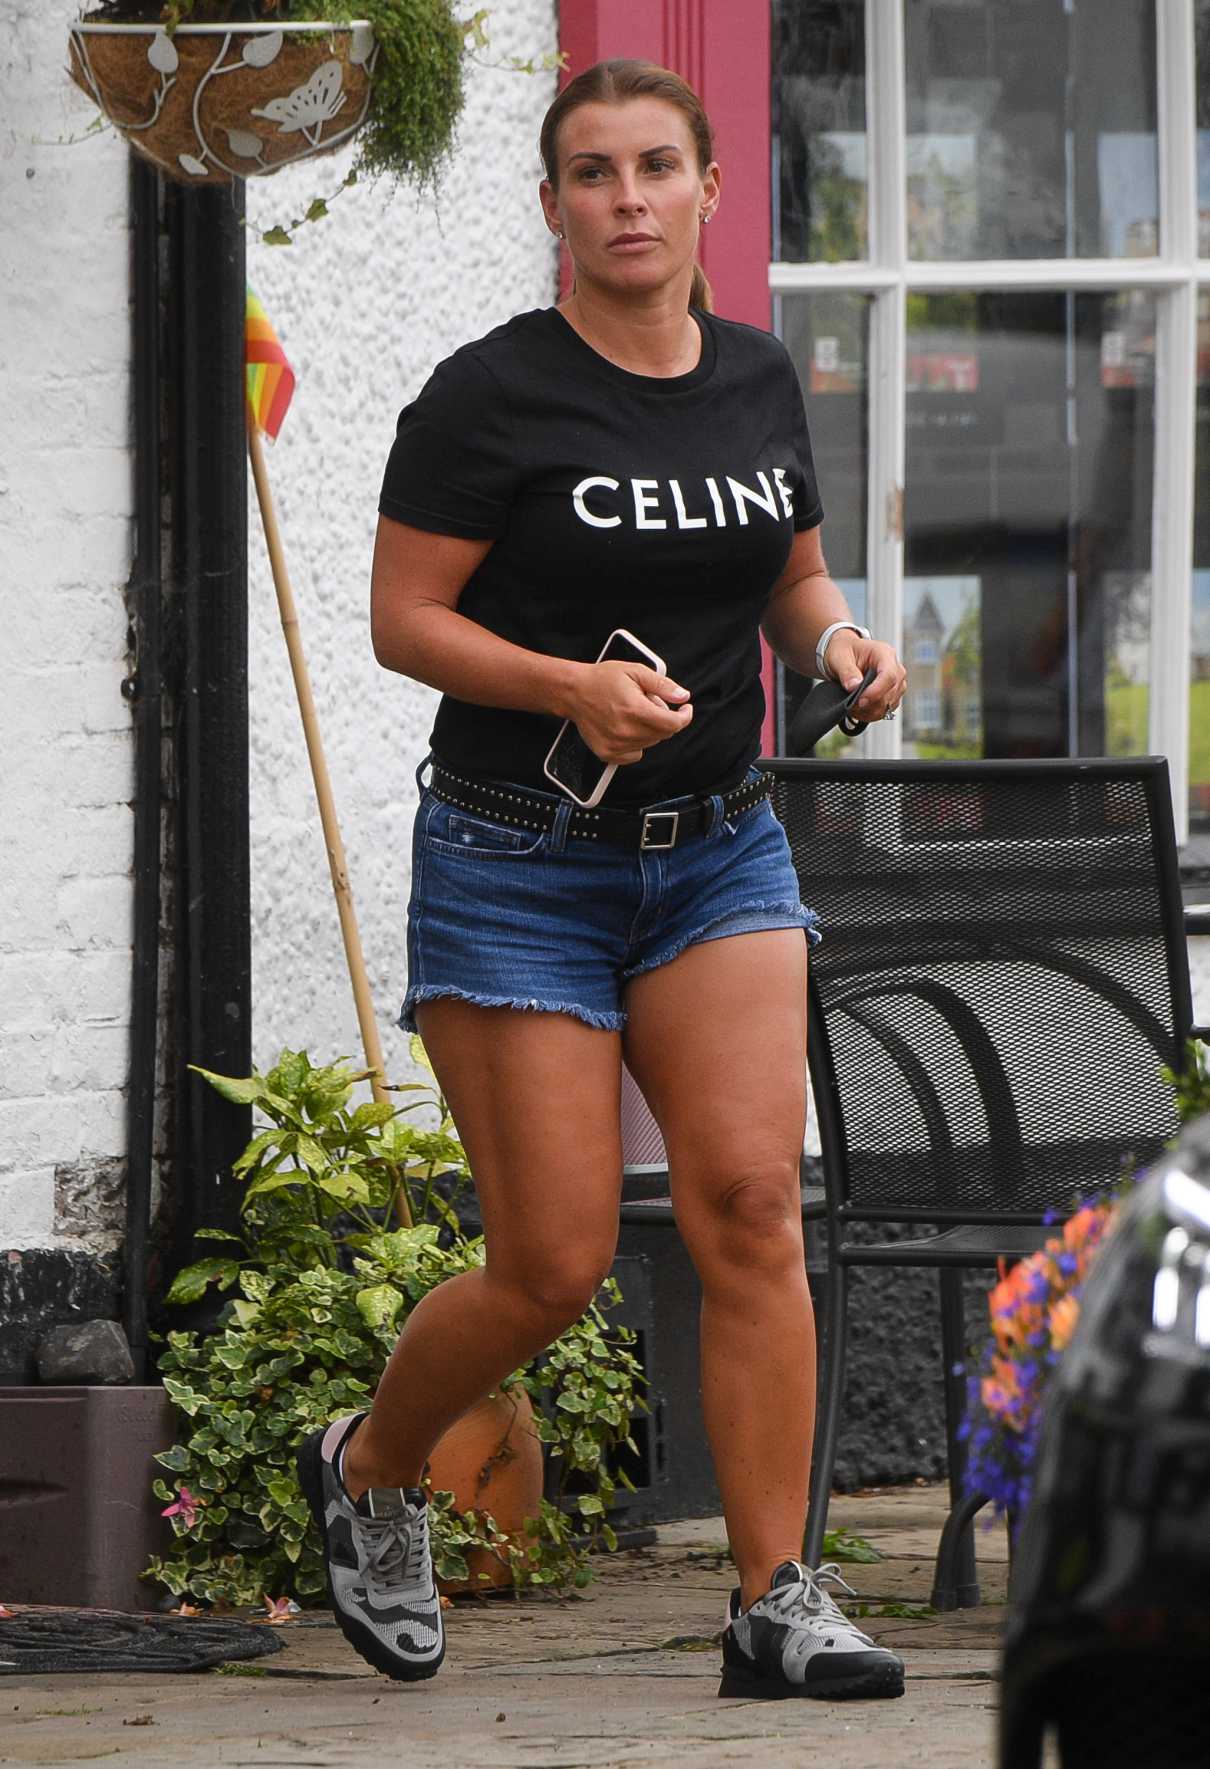 Coleen Rooney In A Black Tee Was Seen Out In Barbados 08 19 2020 3 Lacelebs Co